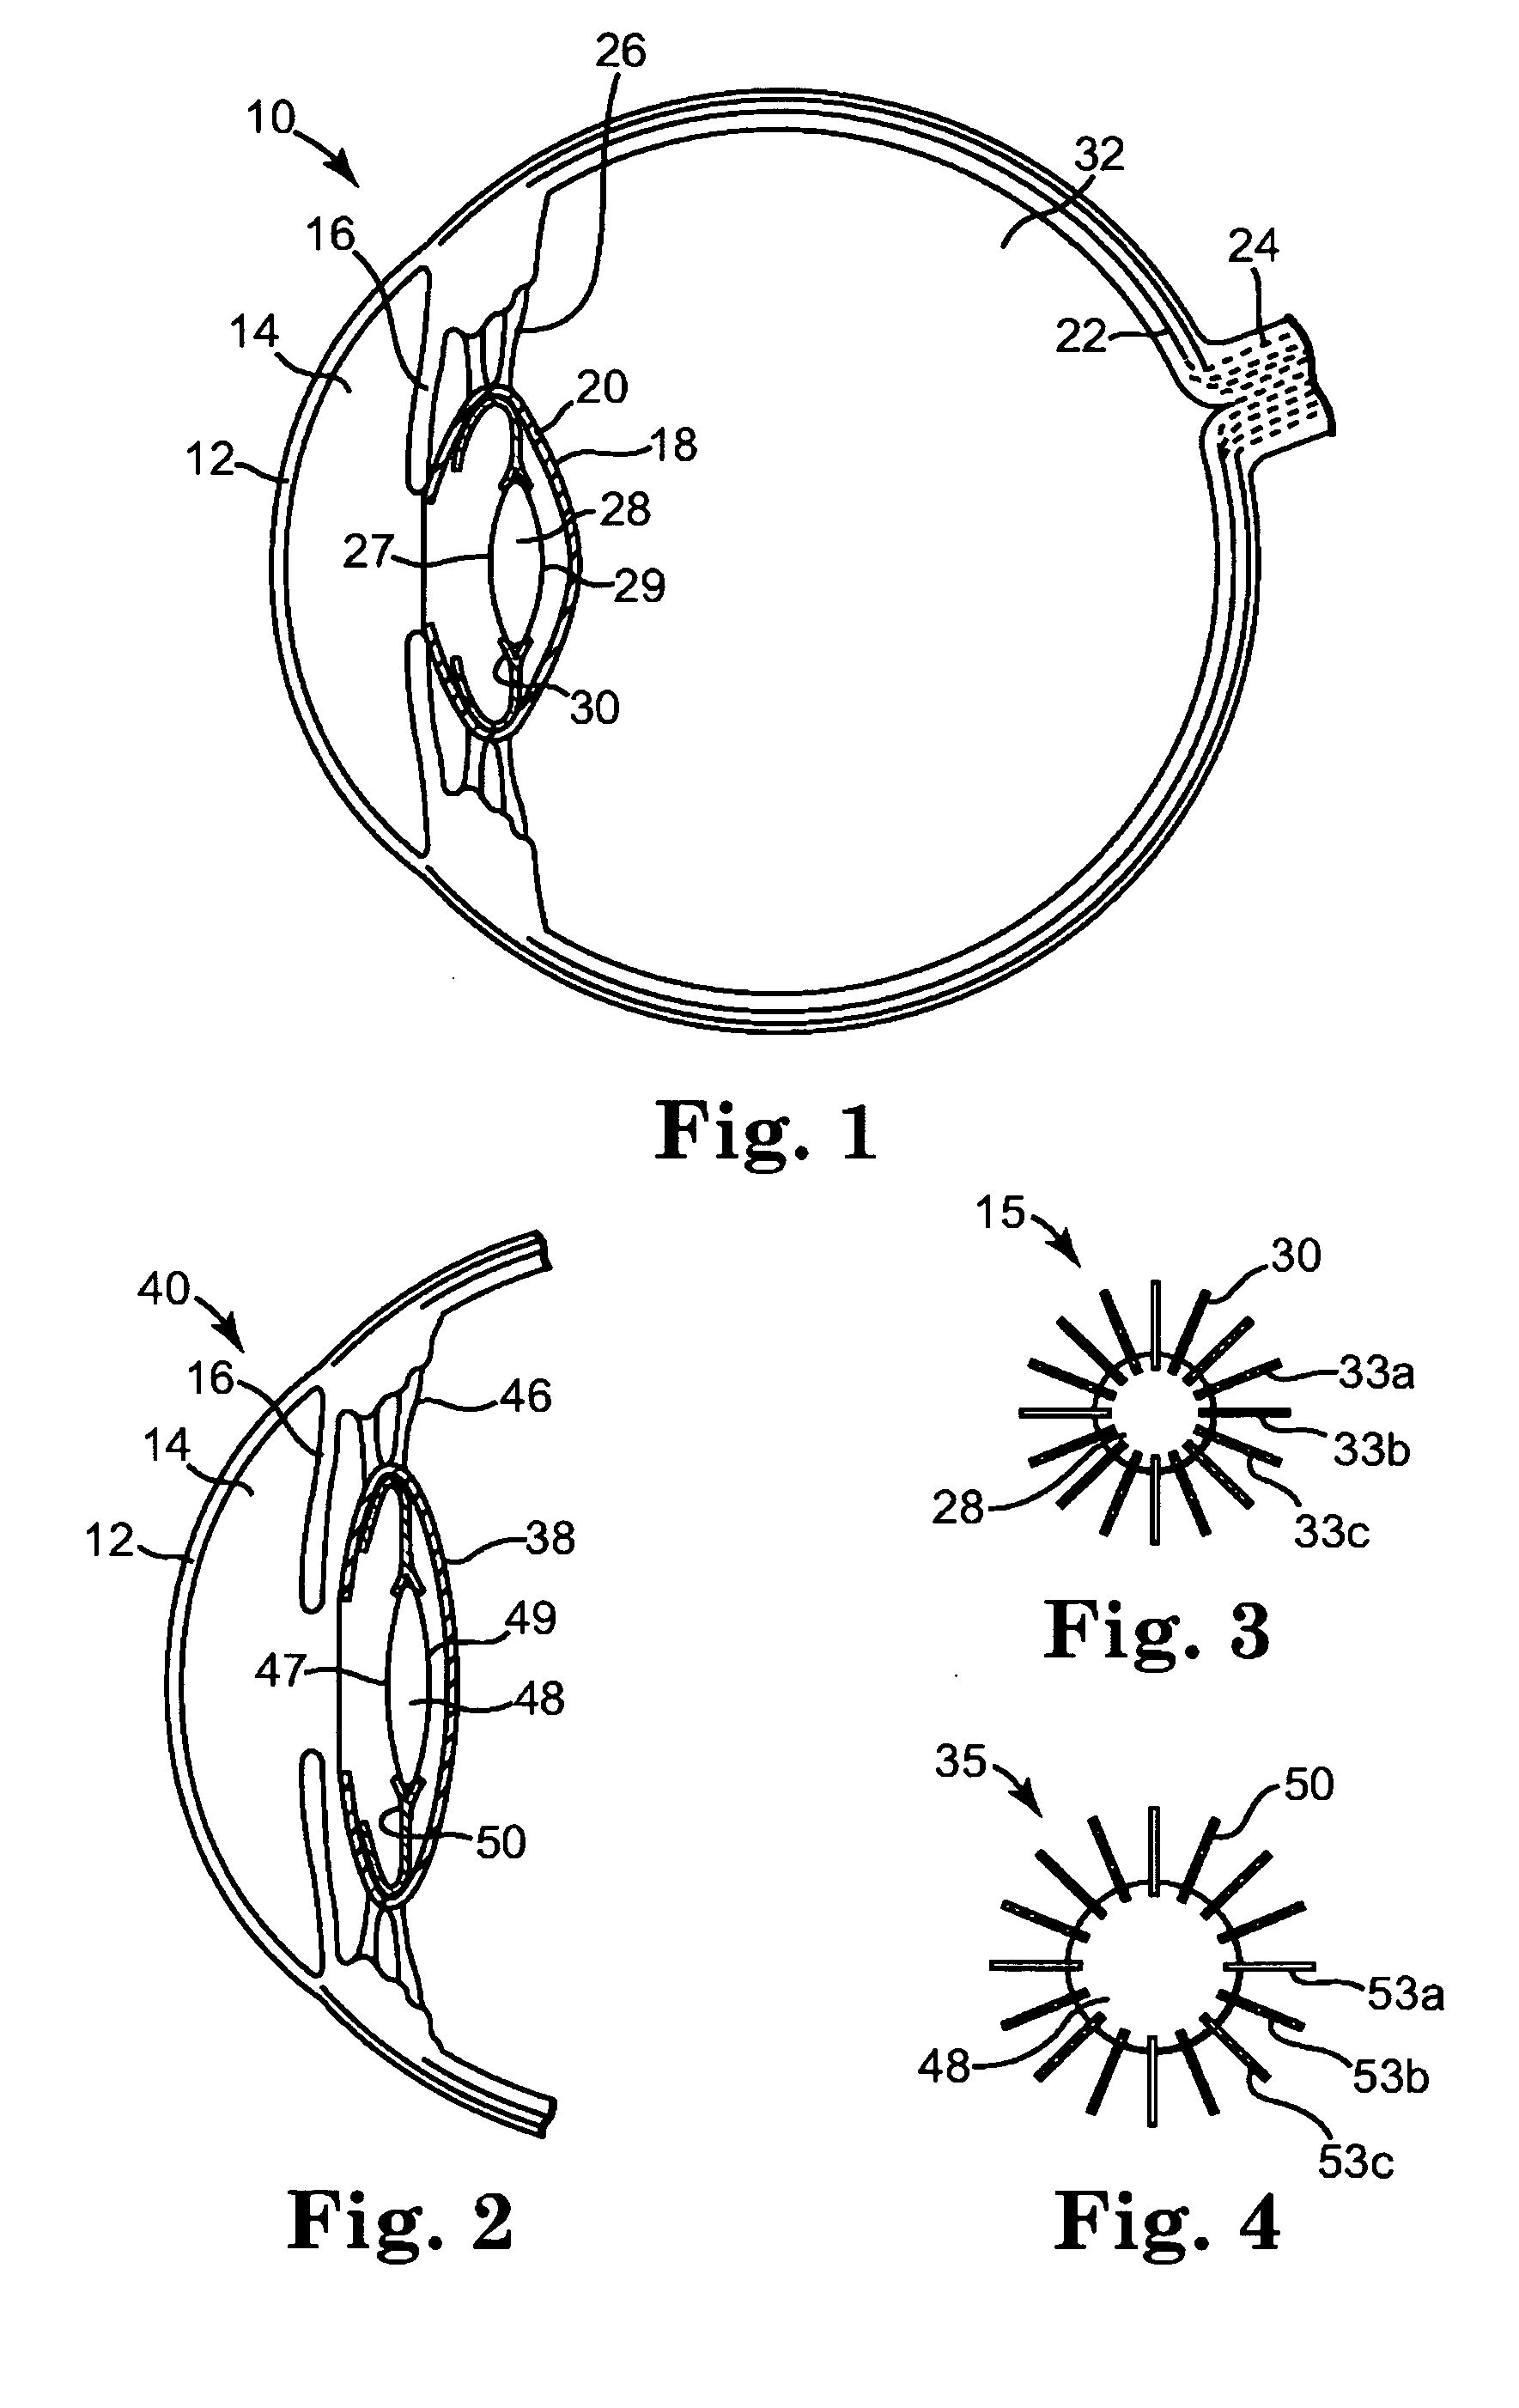 Haptic for accommodating intraocular lens